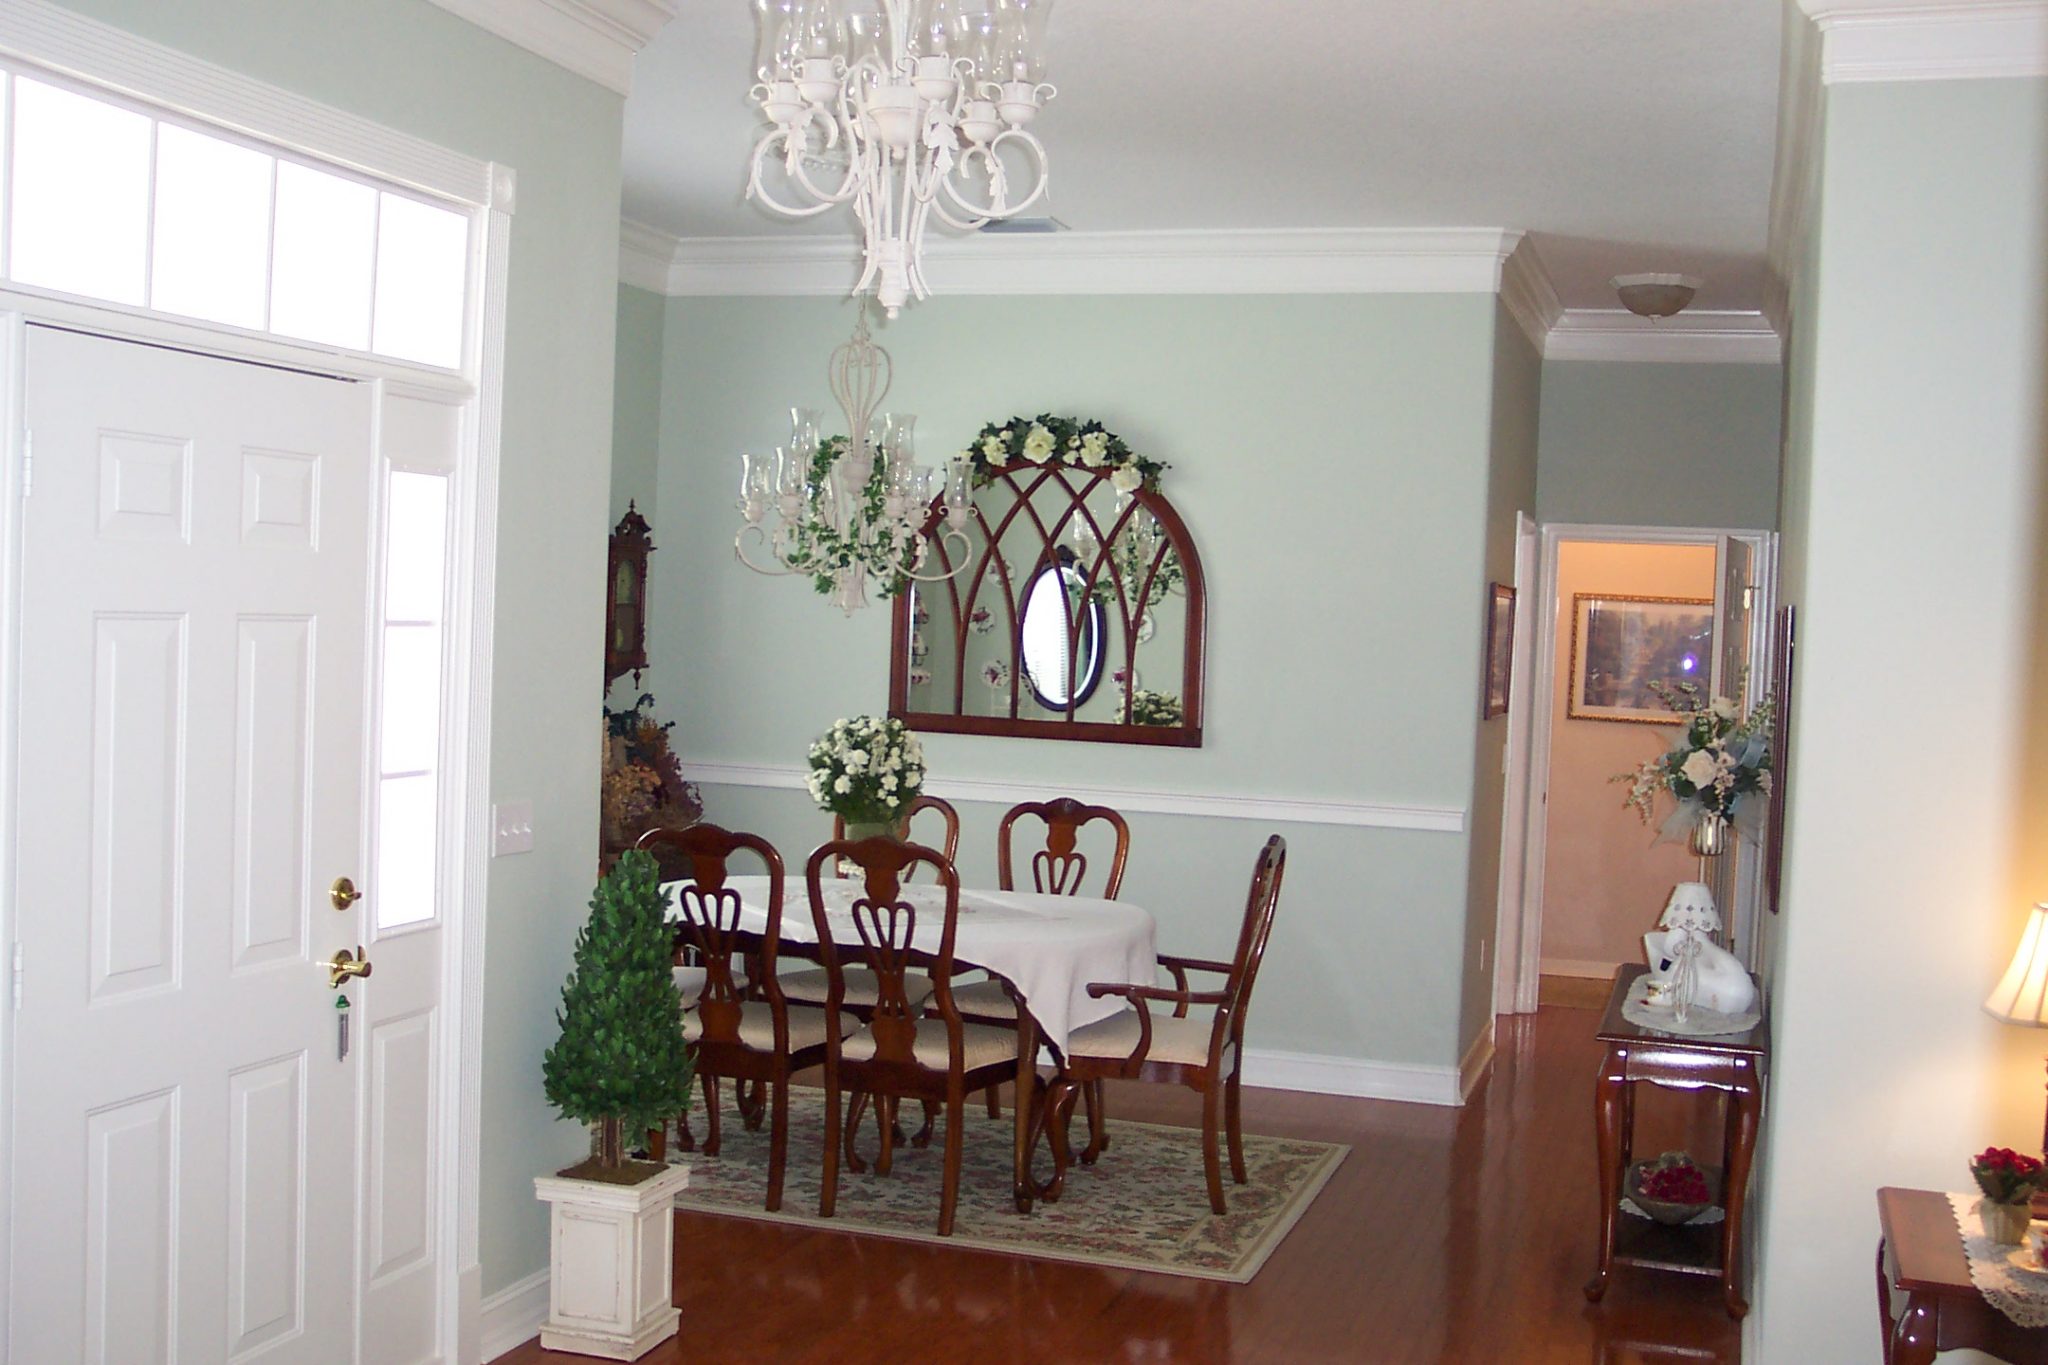 View of the Windsor formal dining area, one of our premier "Smart Home" models.